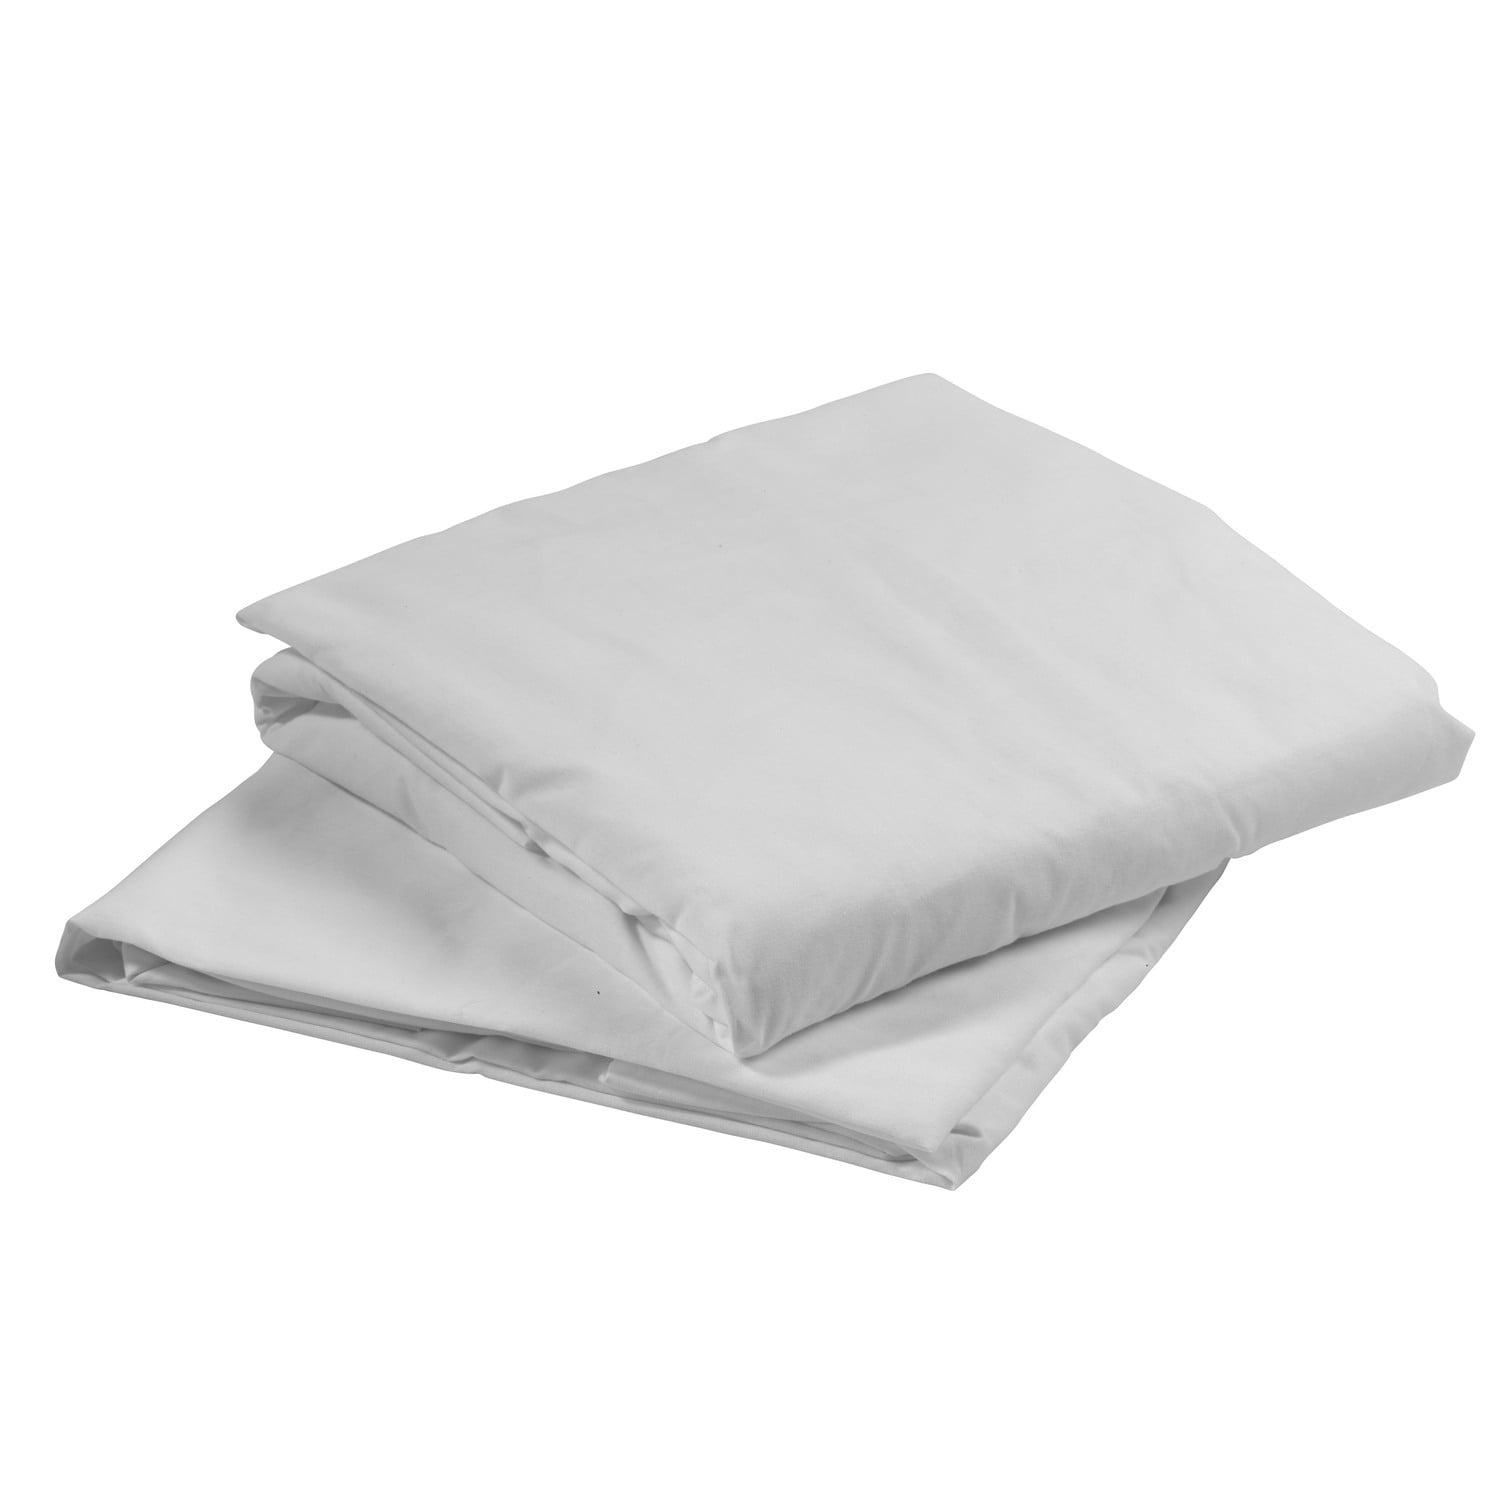 4 new white medical bed sheets 36x80x7 white hospital fitted 100% cotton 